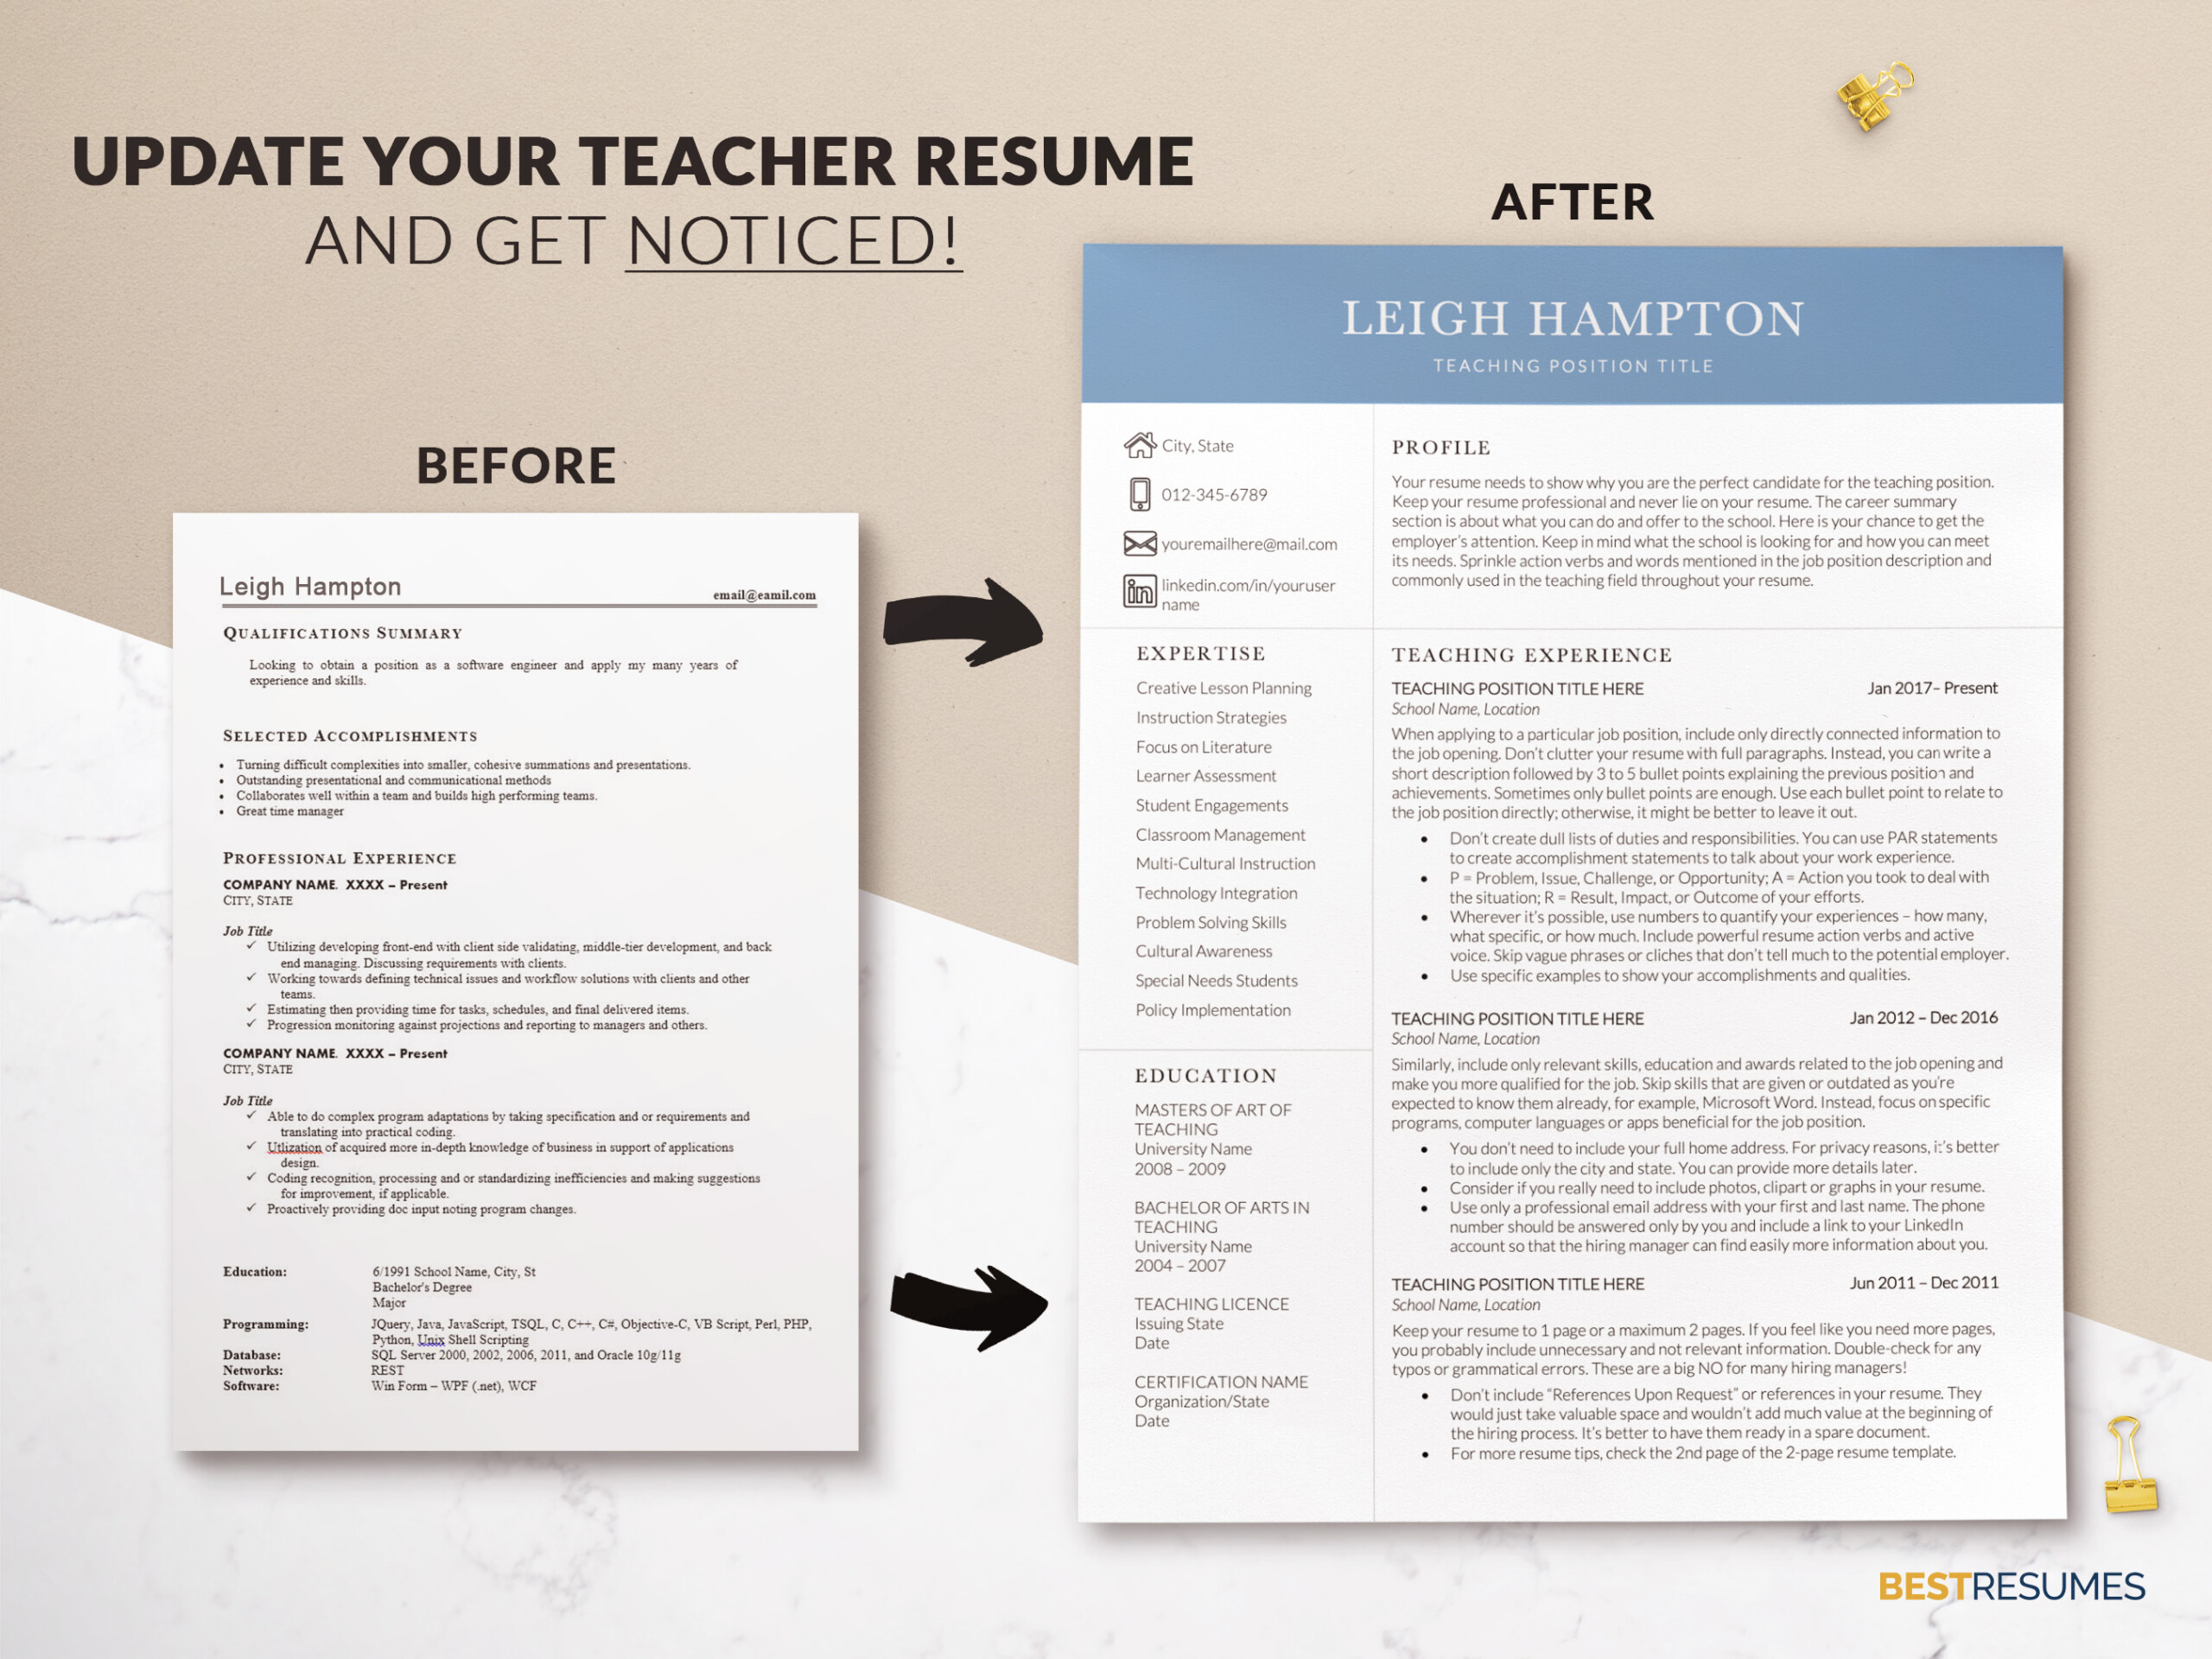 Professional Teacher Resume Word and Cover Letter Update your Teacher Resume Leigh Hampton